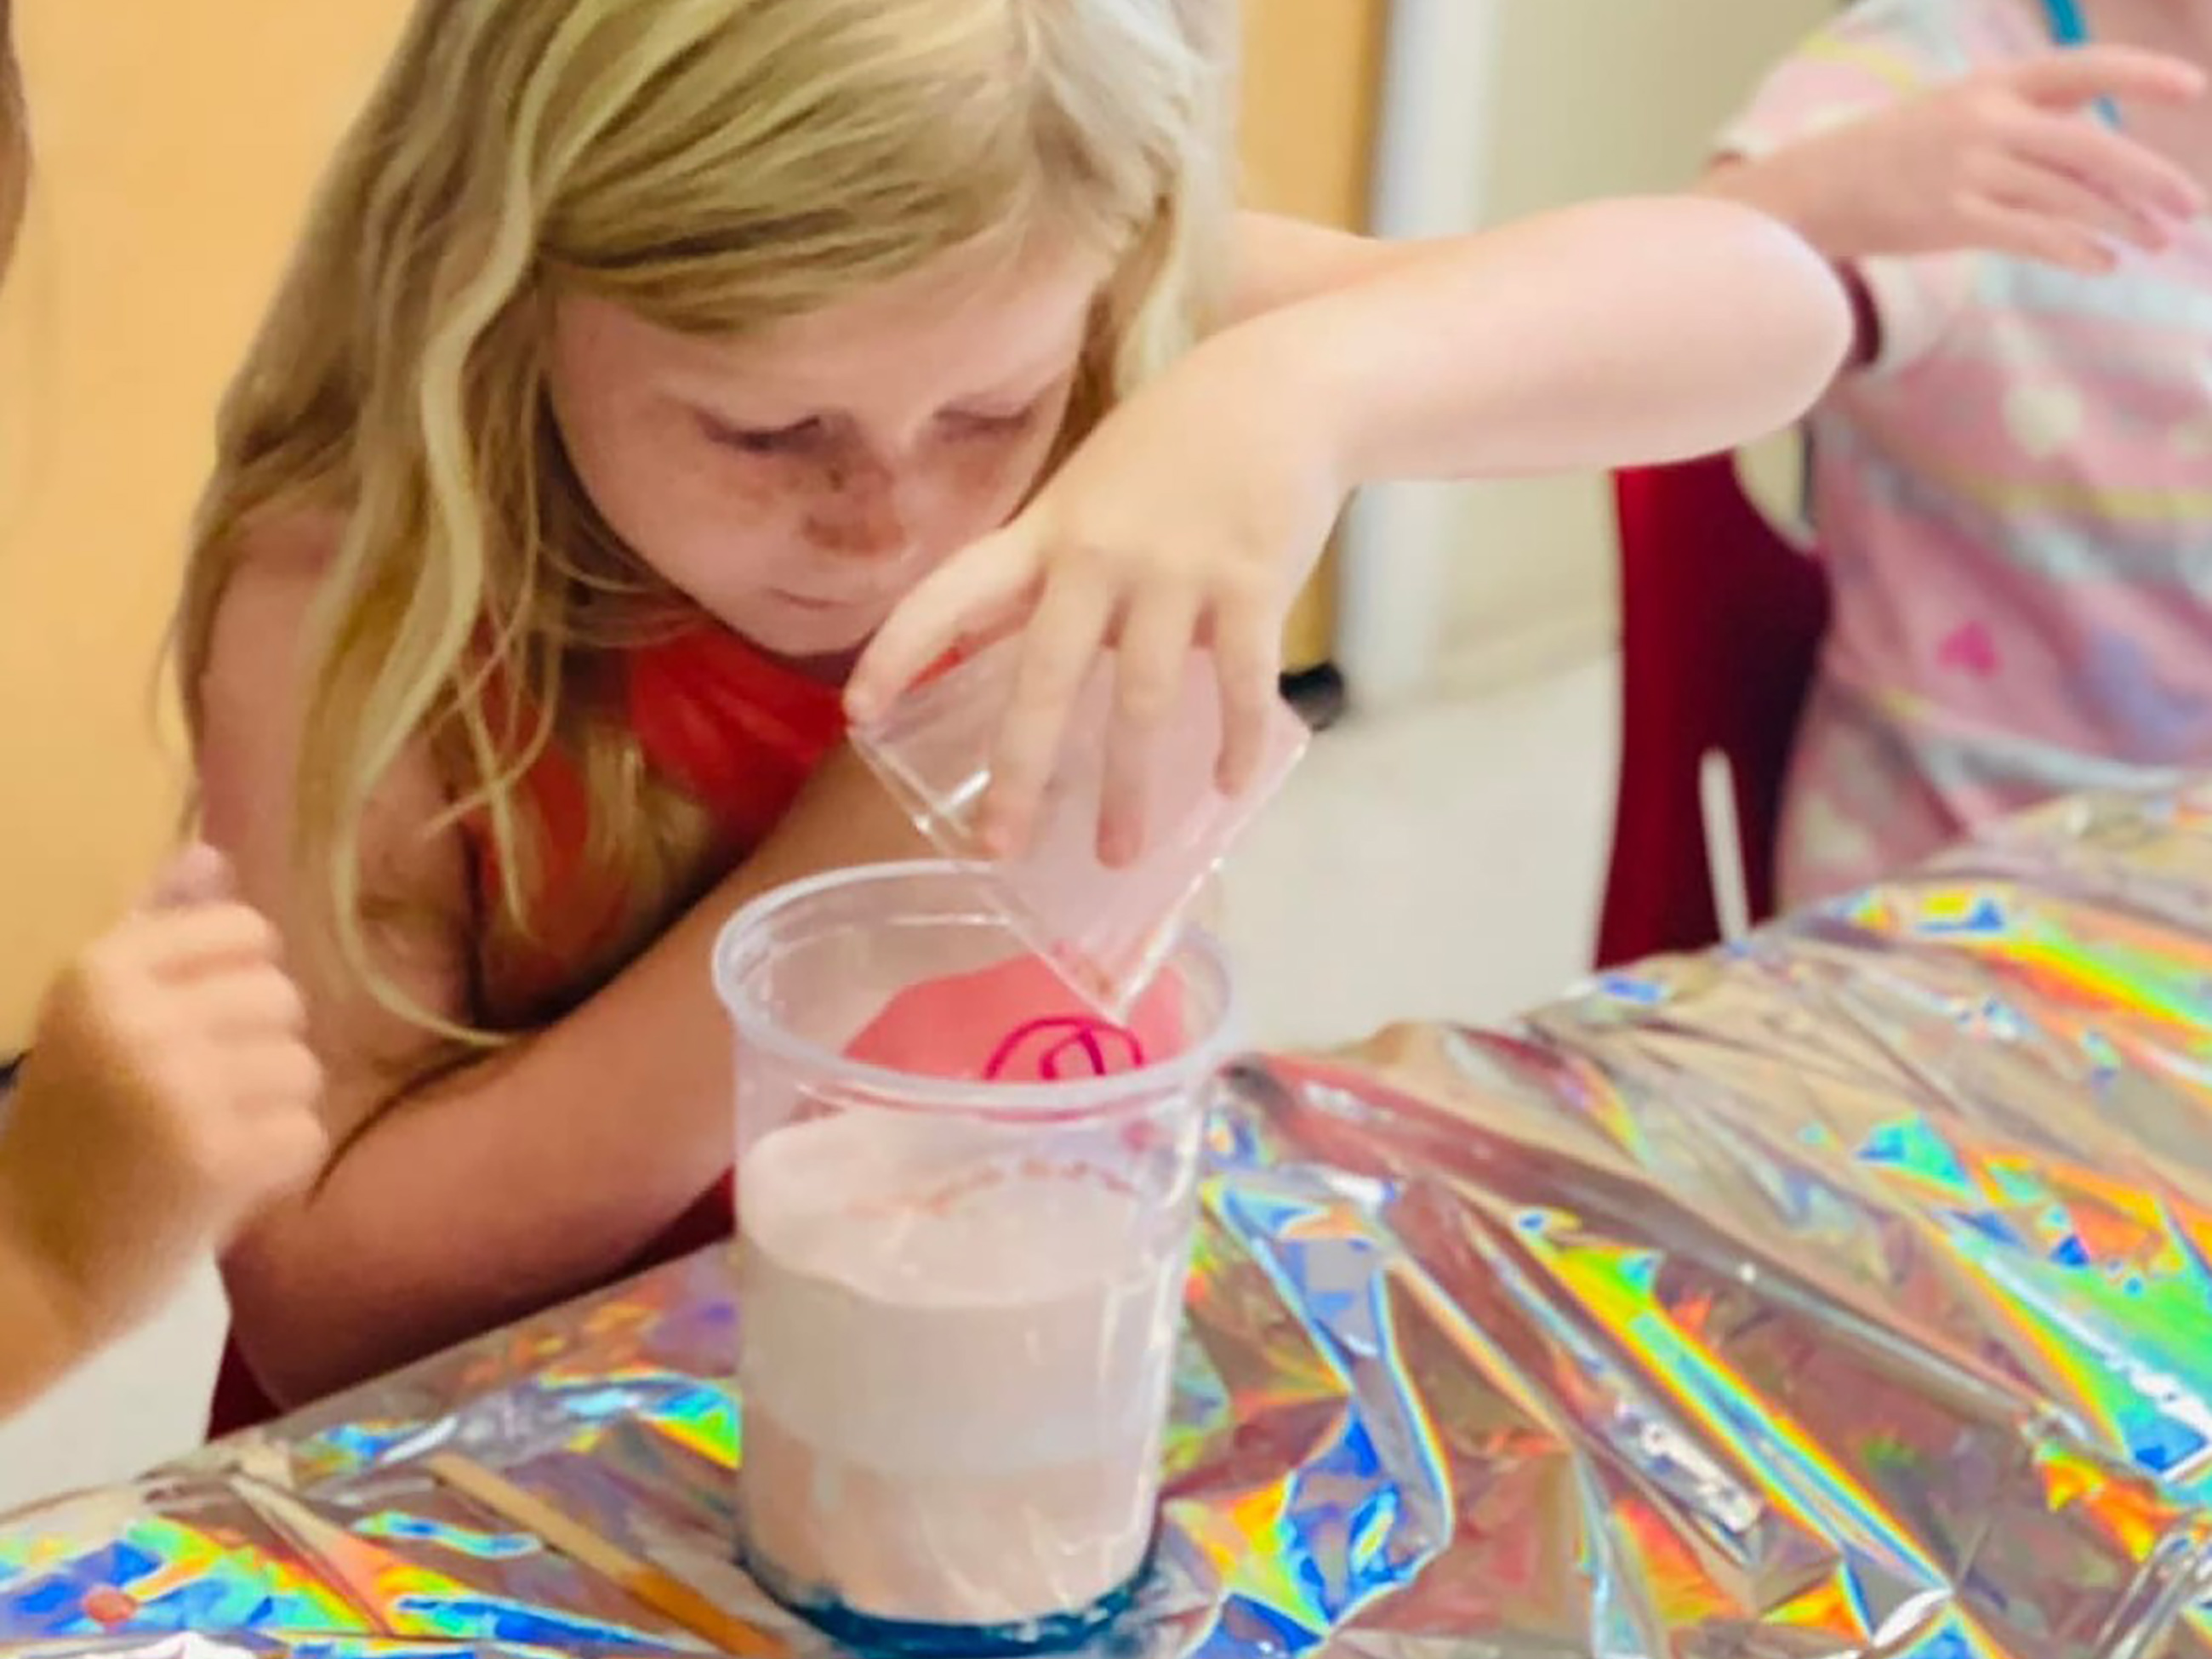 At the Primrose Schools Summer Adventure Club, children enjoy engineering design challenges, experiments and themed activities.